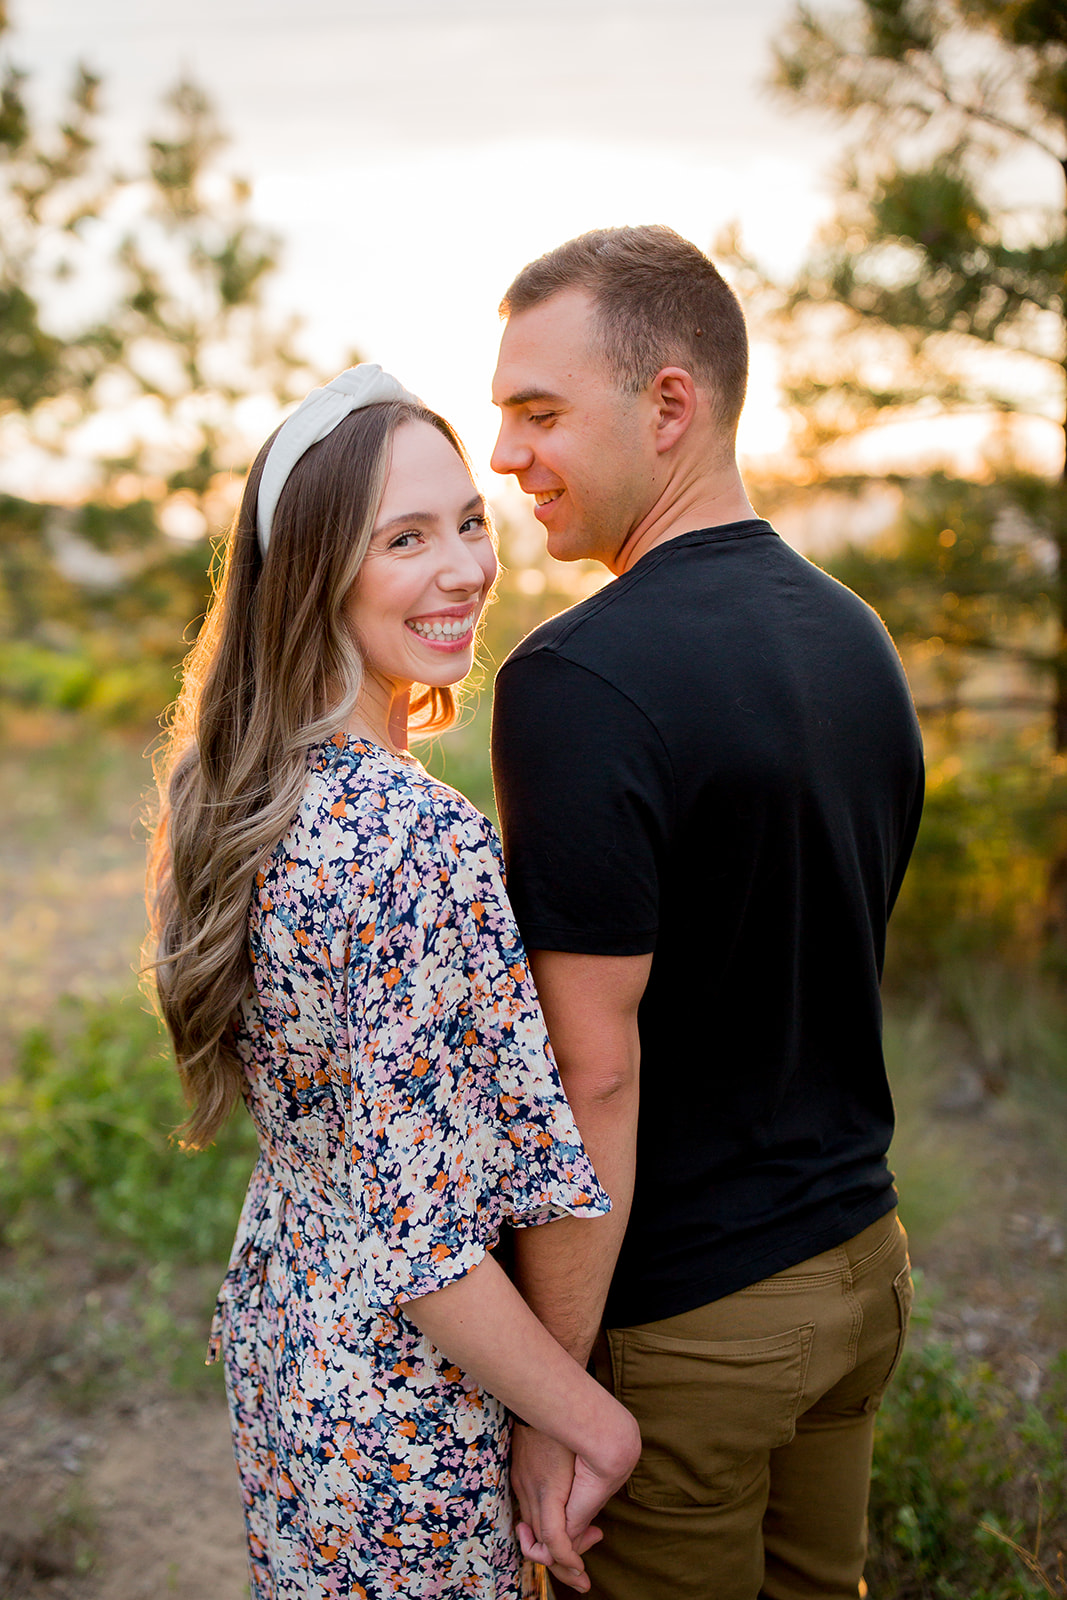 Woman smiles back at her engagement photographer while holding hands with her fiance during their outdoor photoshoot